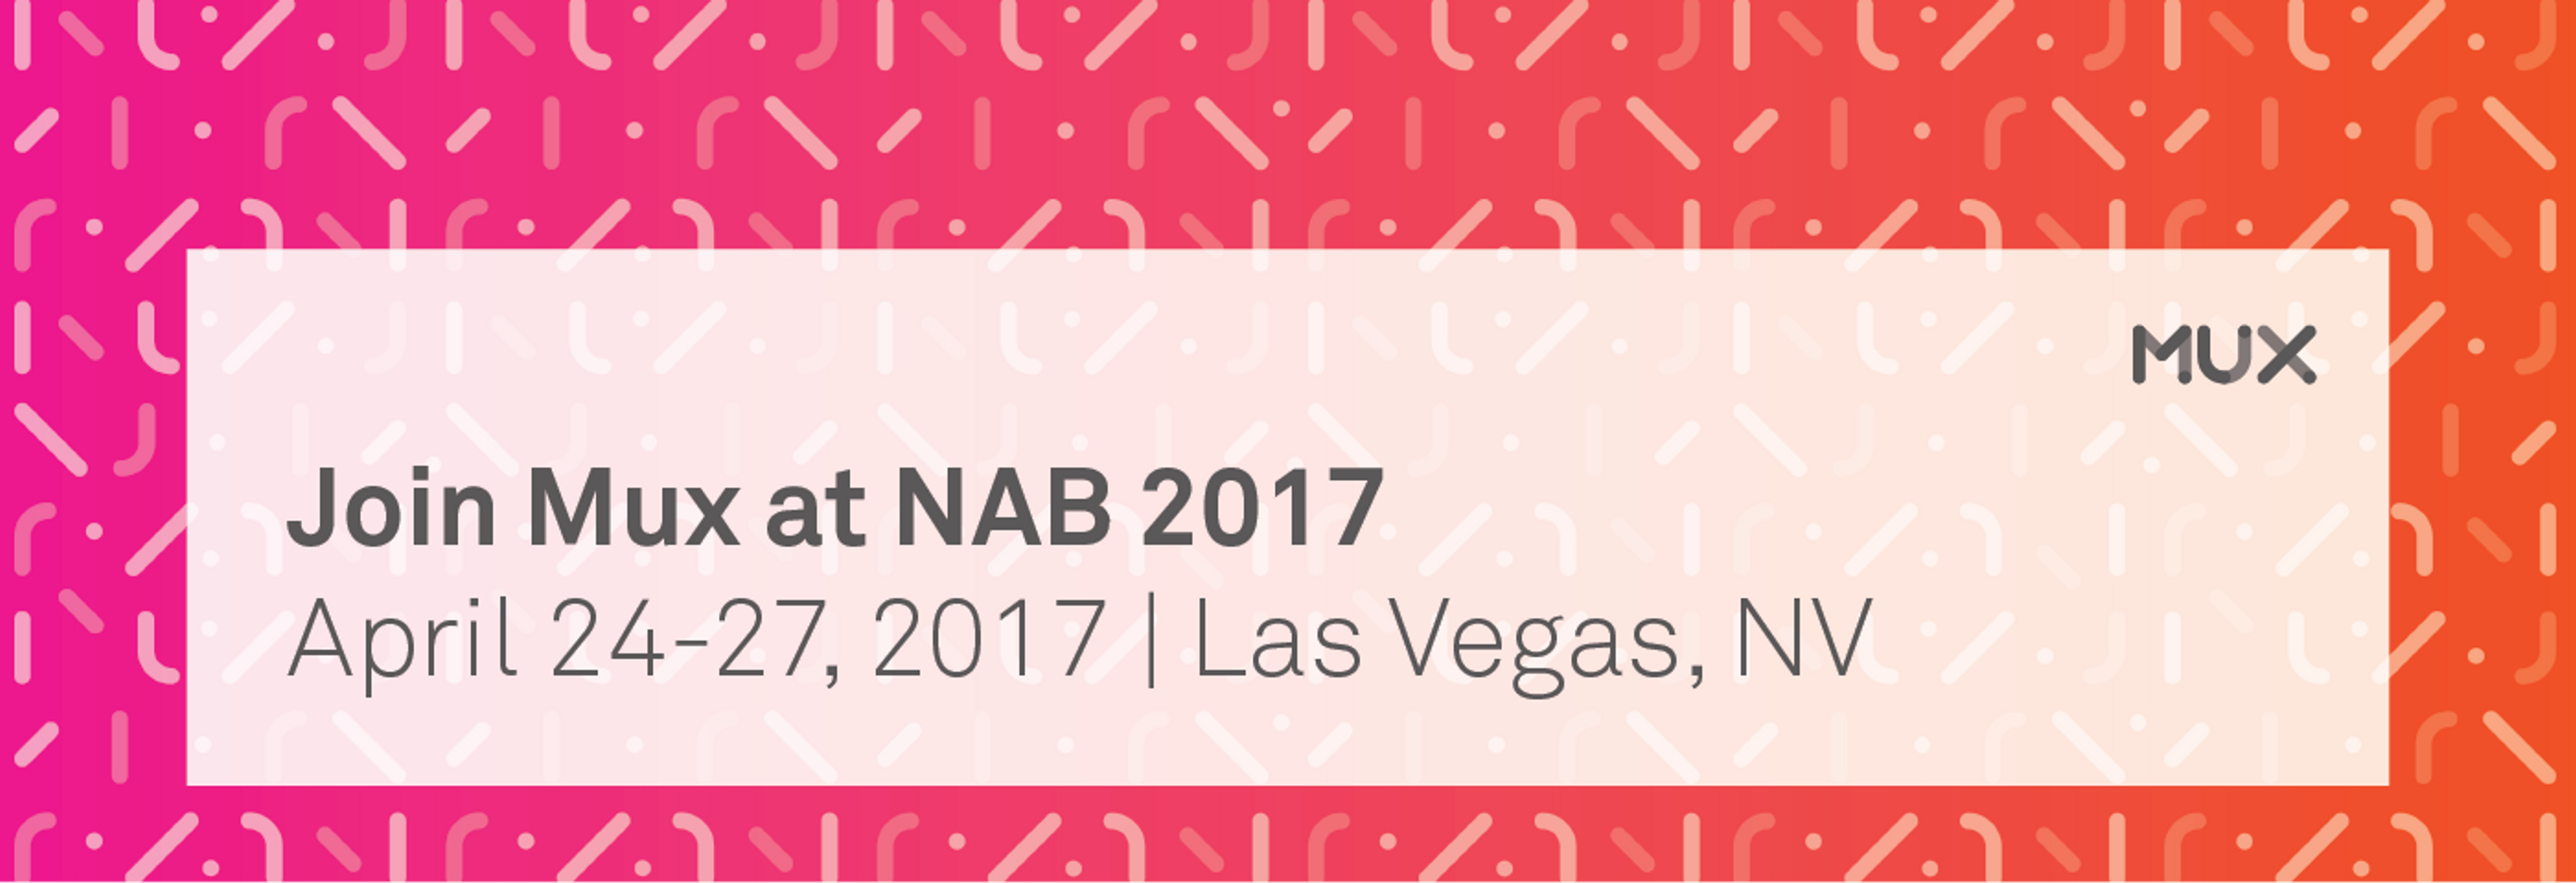 Mux at the NAB Show 2017 in Las Vegas